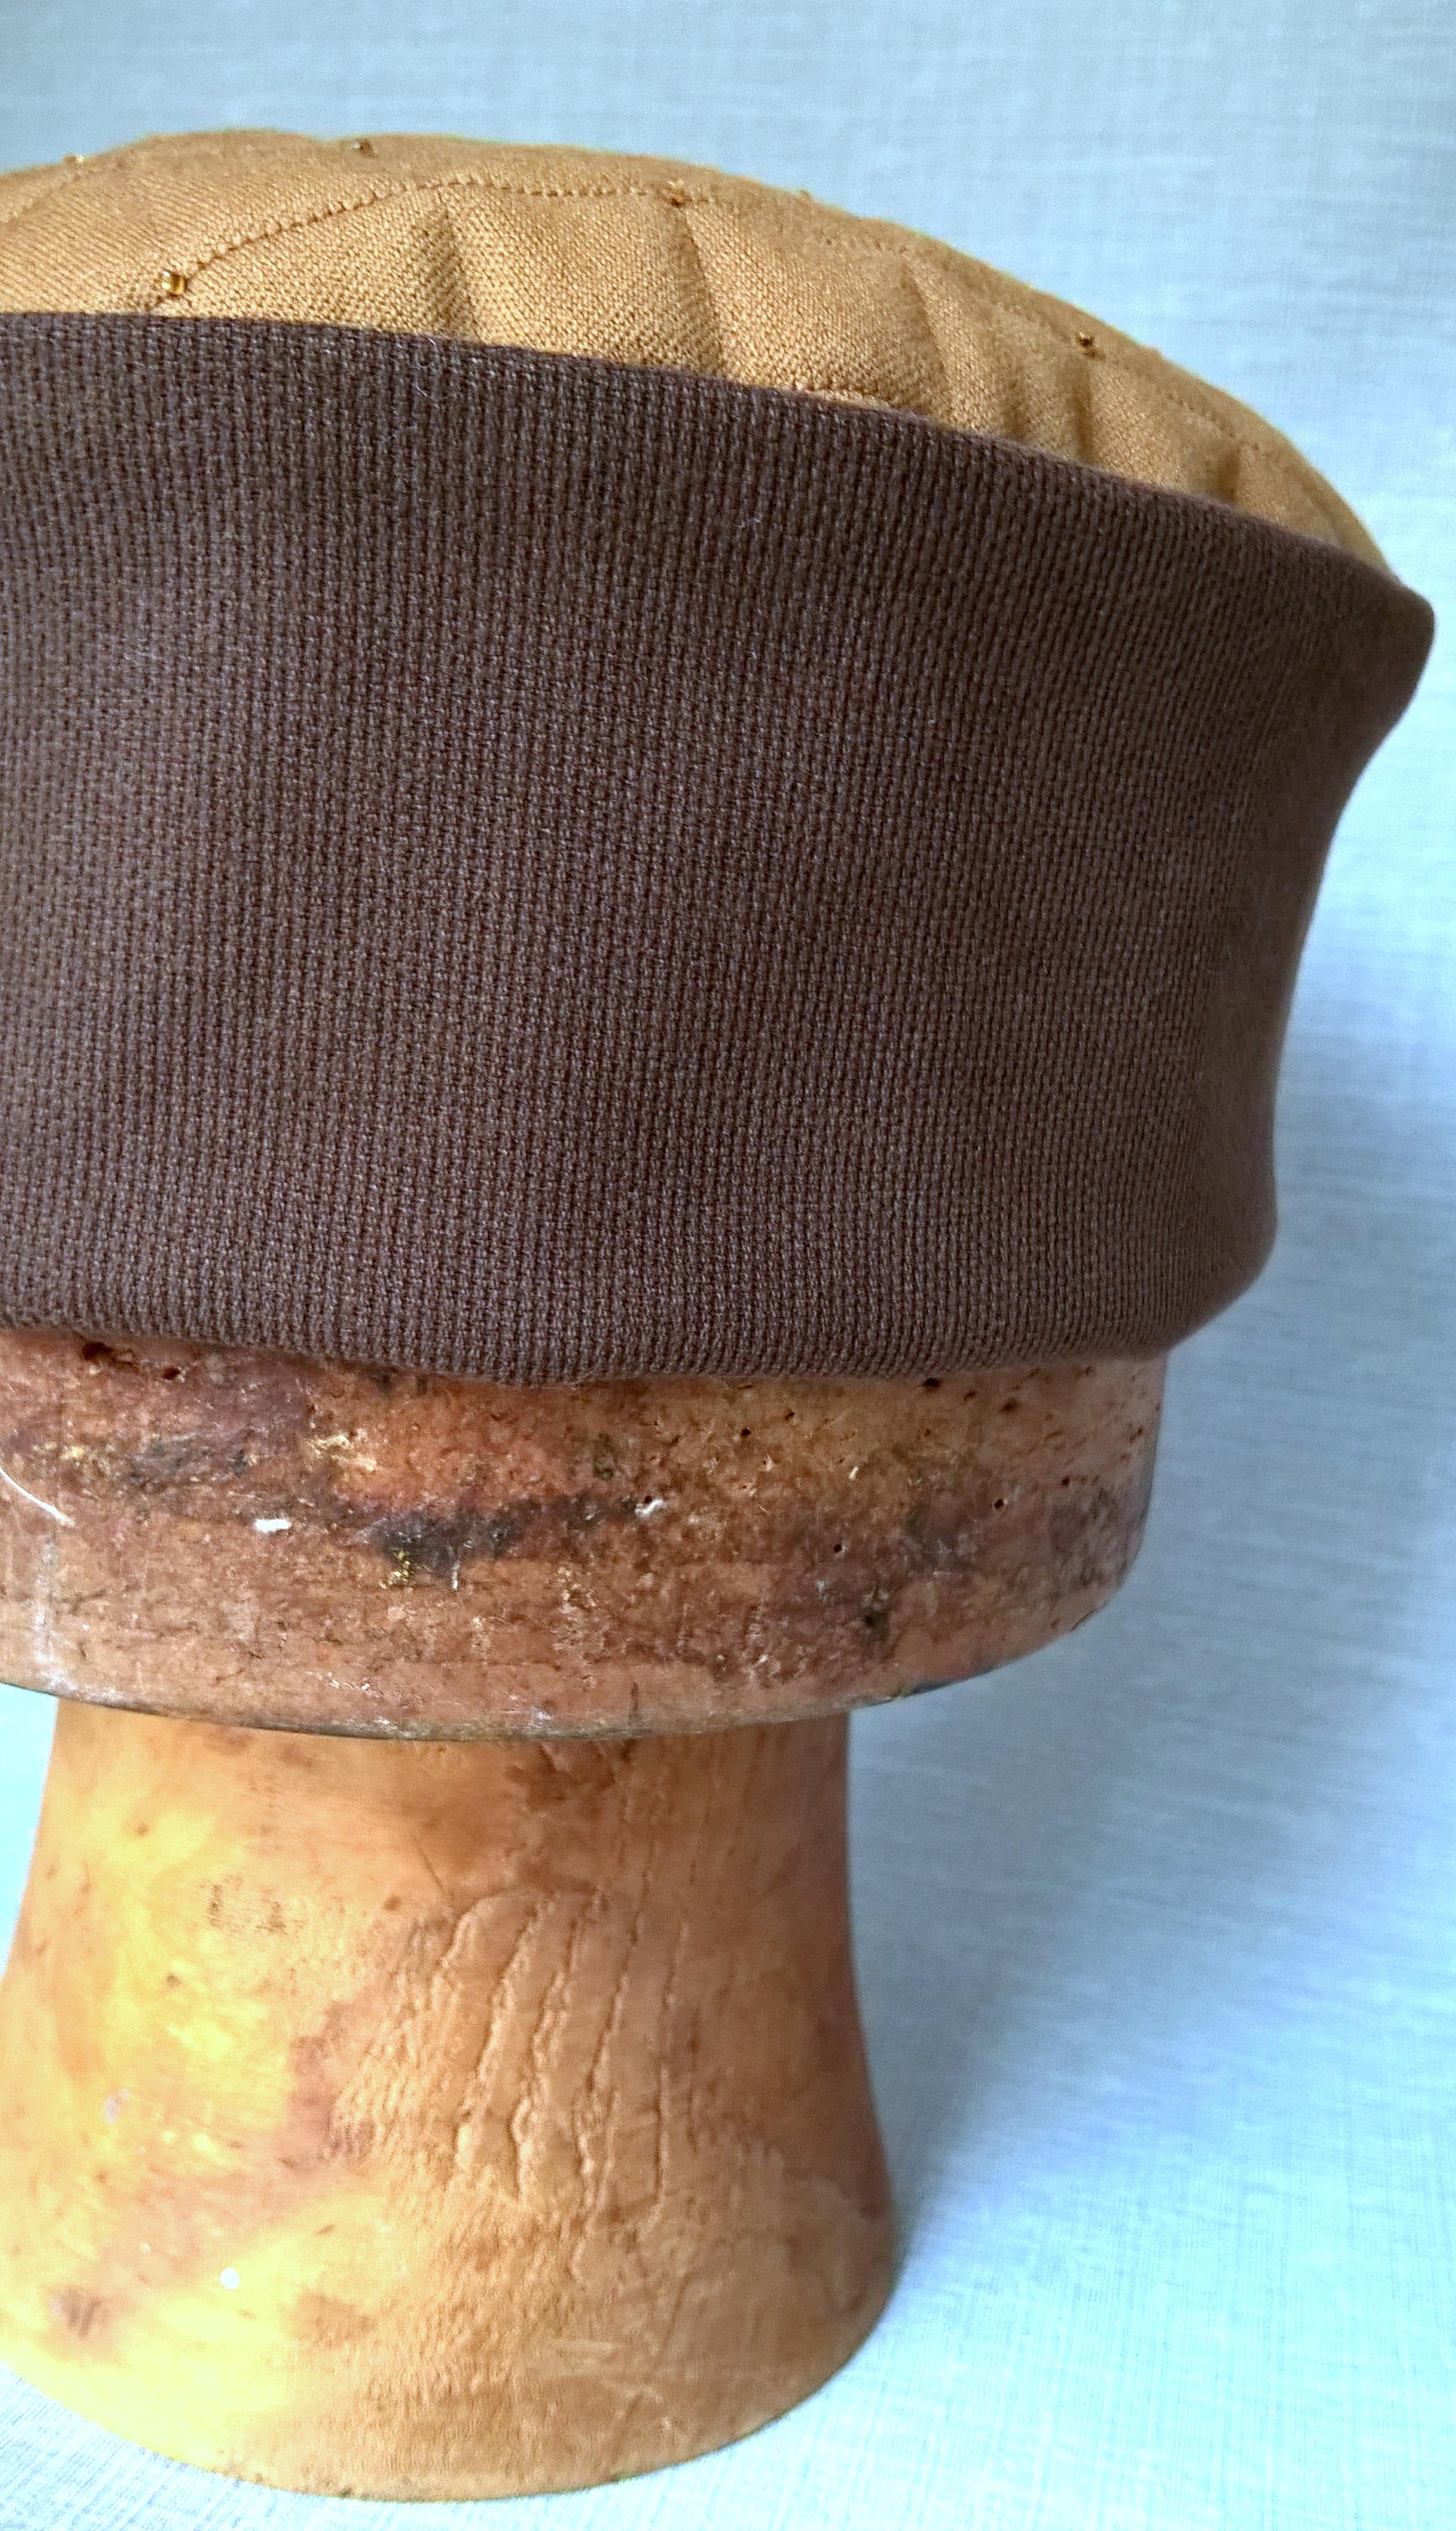 The handmade smoking cap is an easy wear mens hat